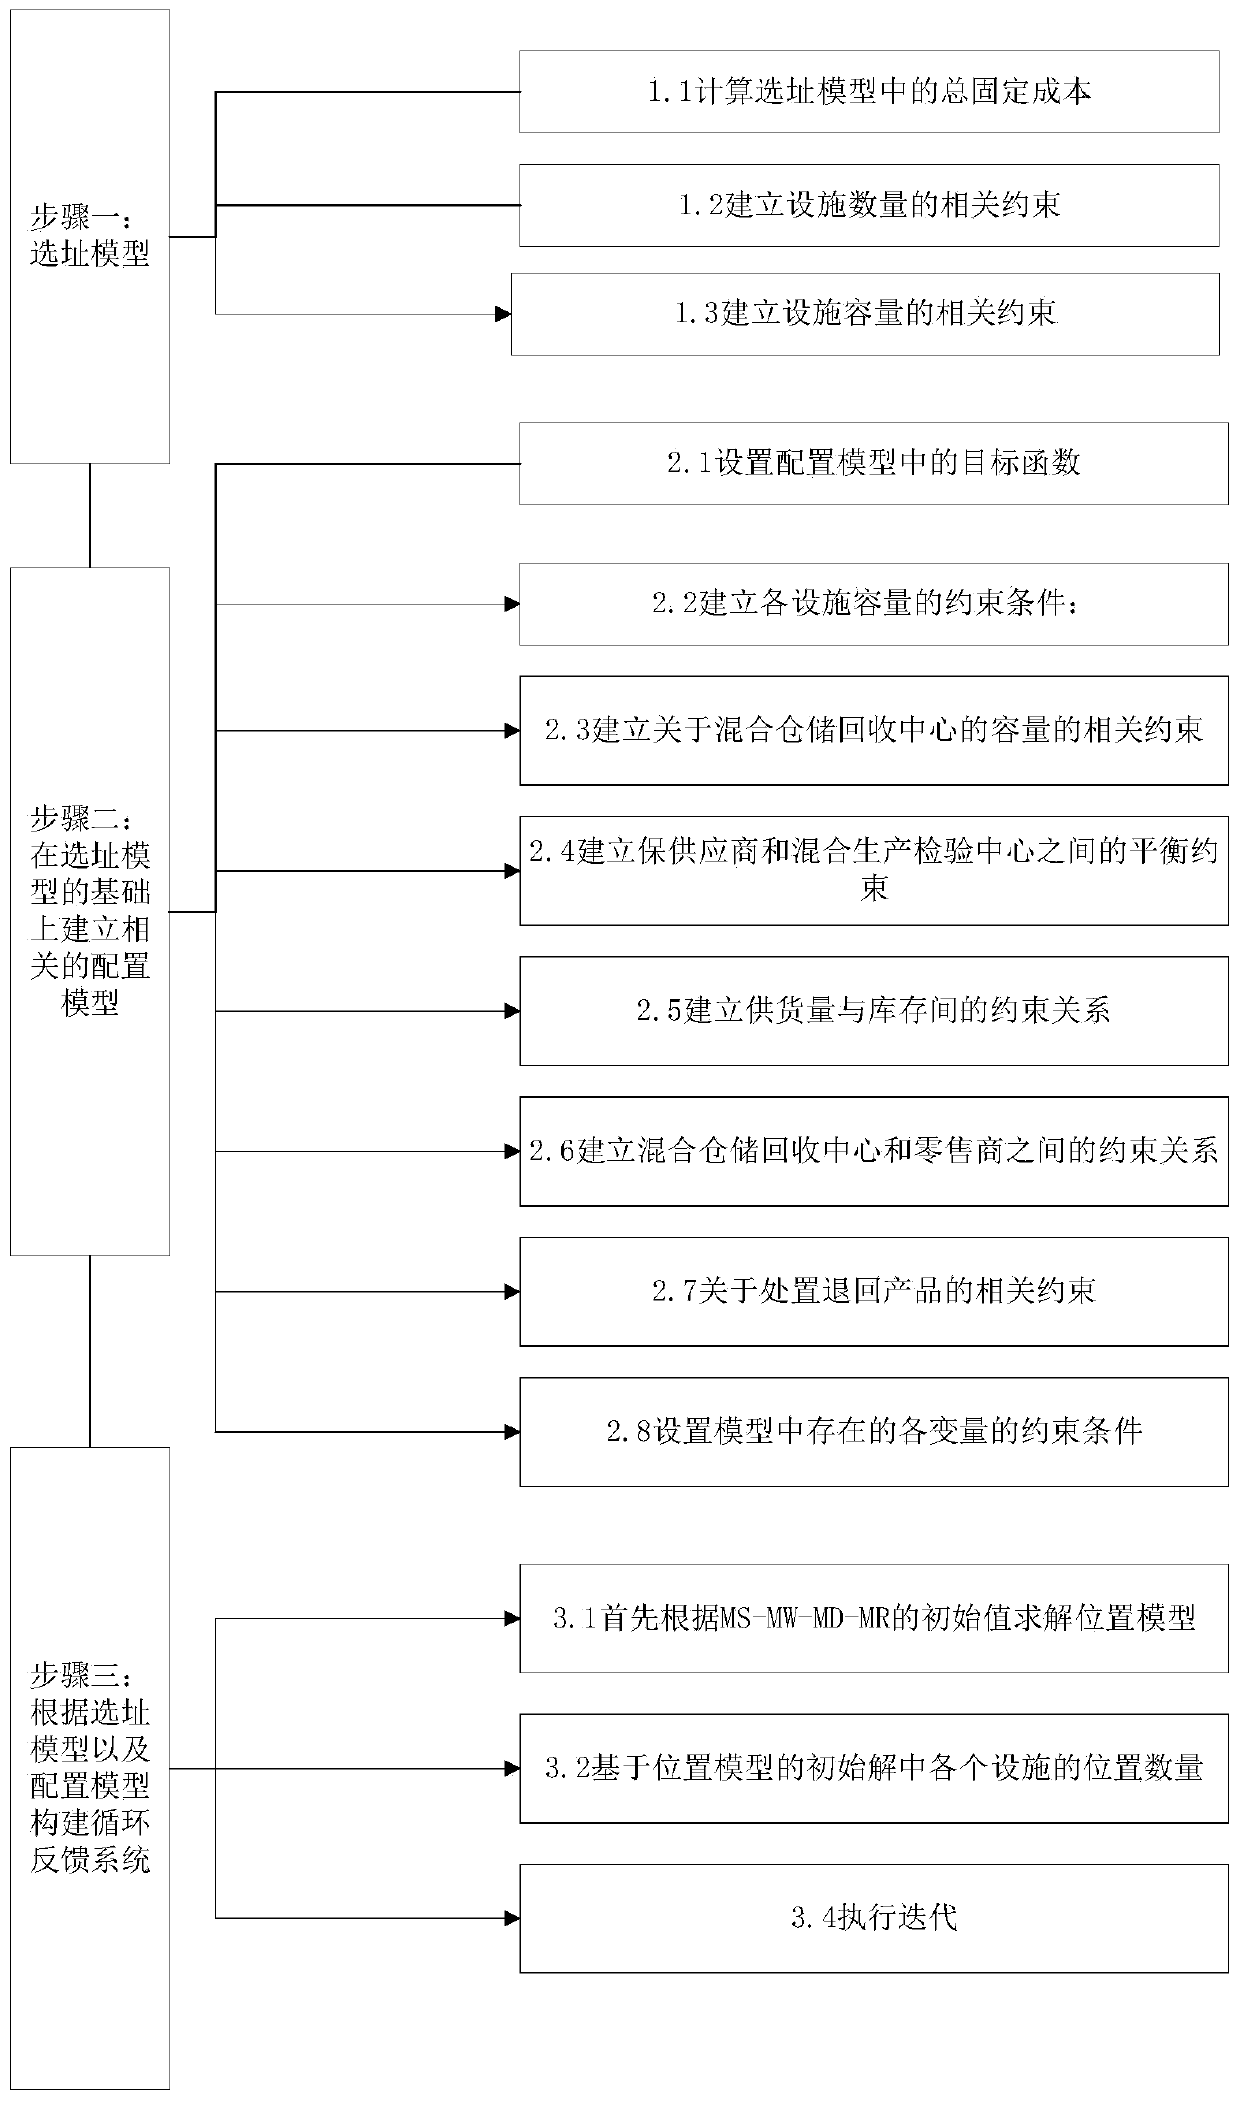 Two-stage scheduling method for multi-period multi-product evanescent product supply chain network design